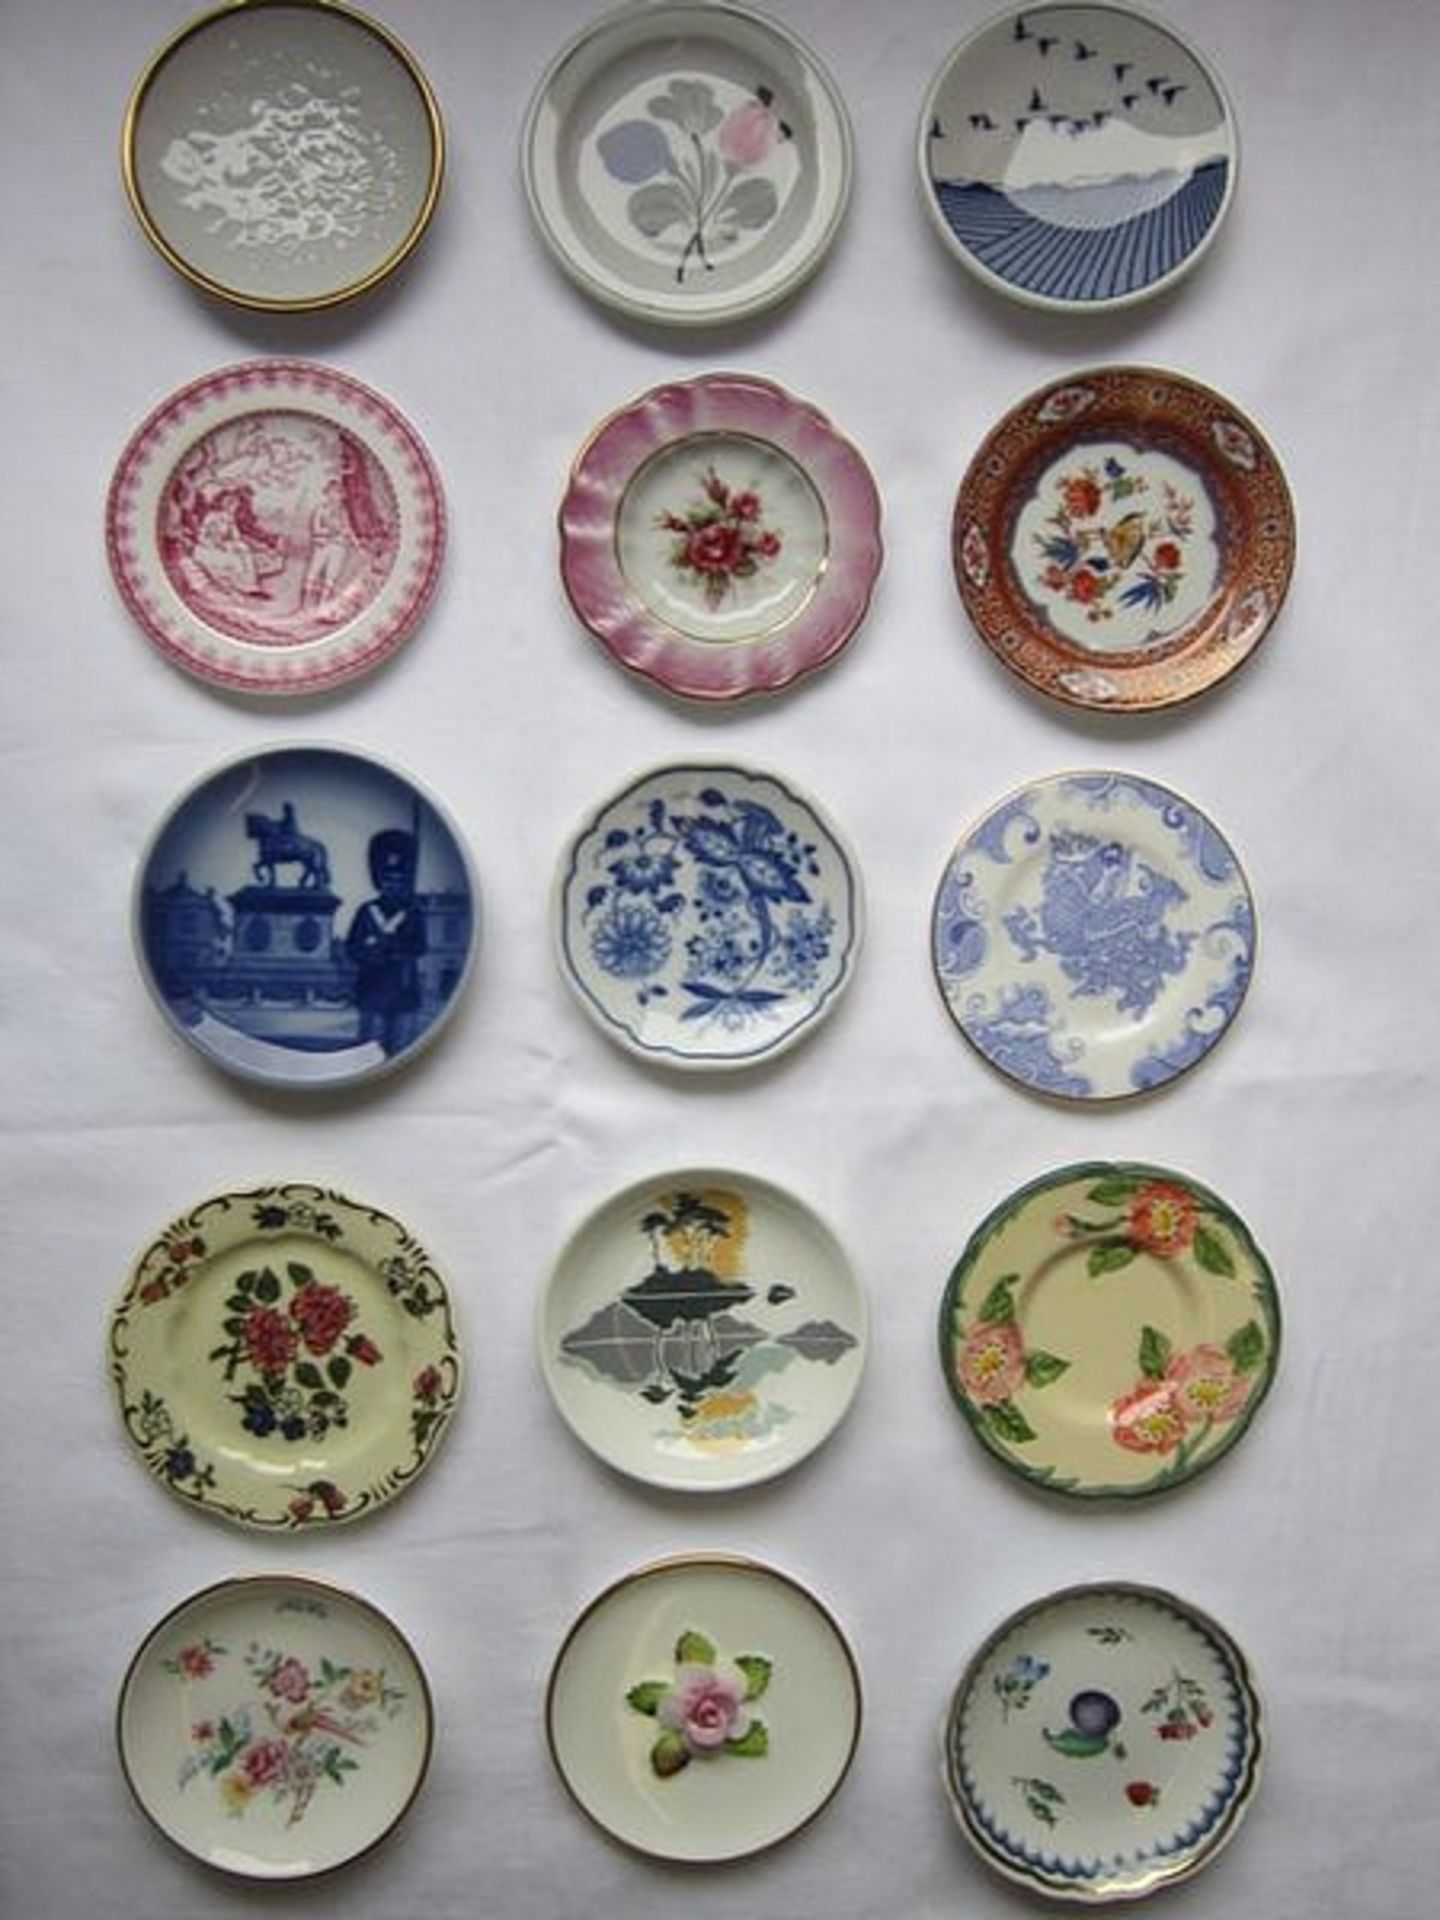 An interesting collectors set of 25 miniature plates, one from each of the leading porcelain